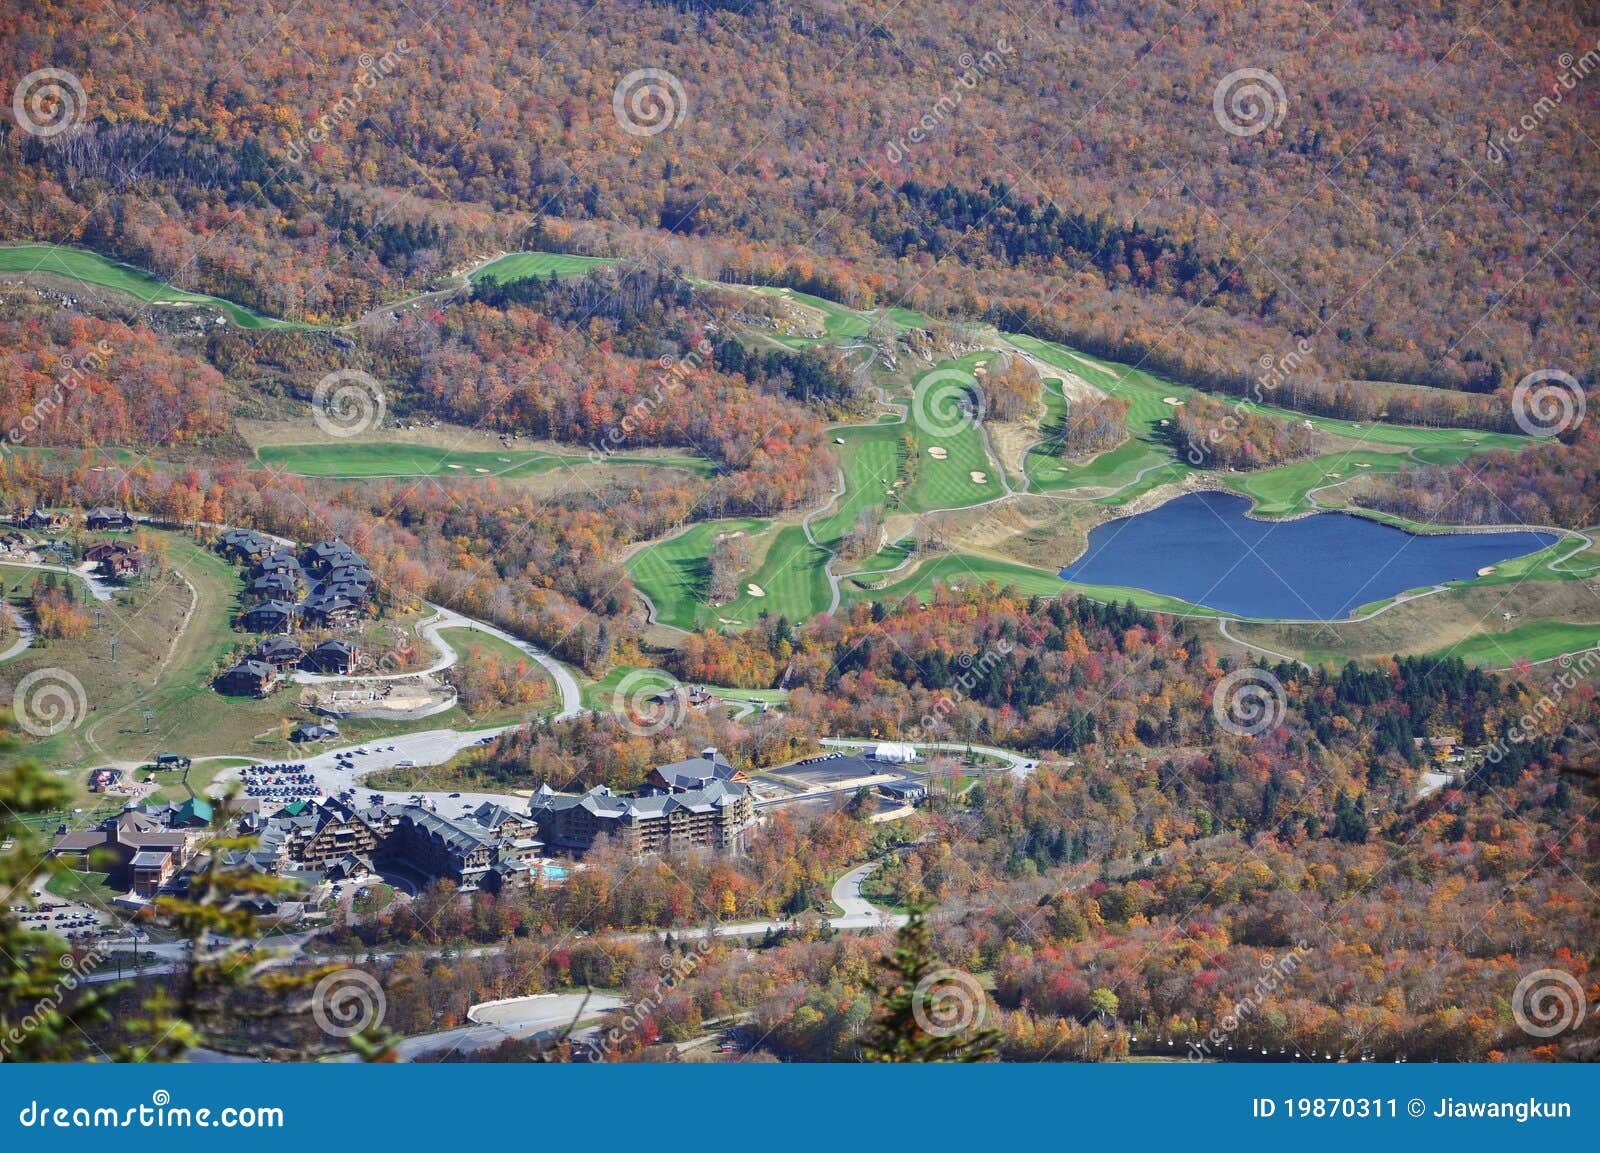 aerial view of golf course and resorts